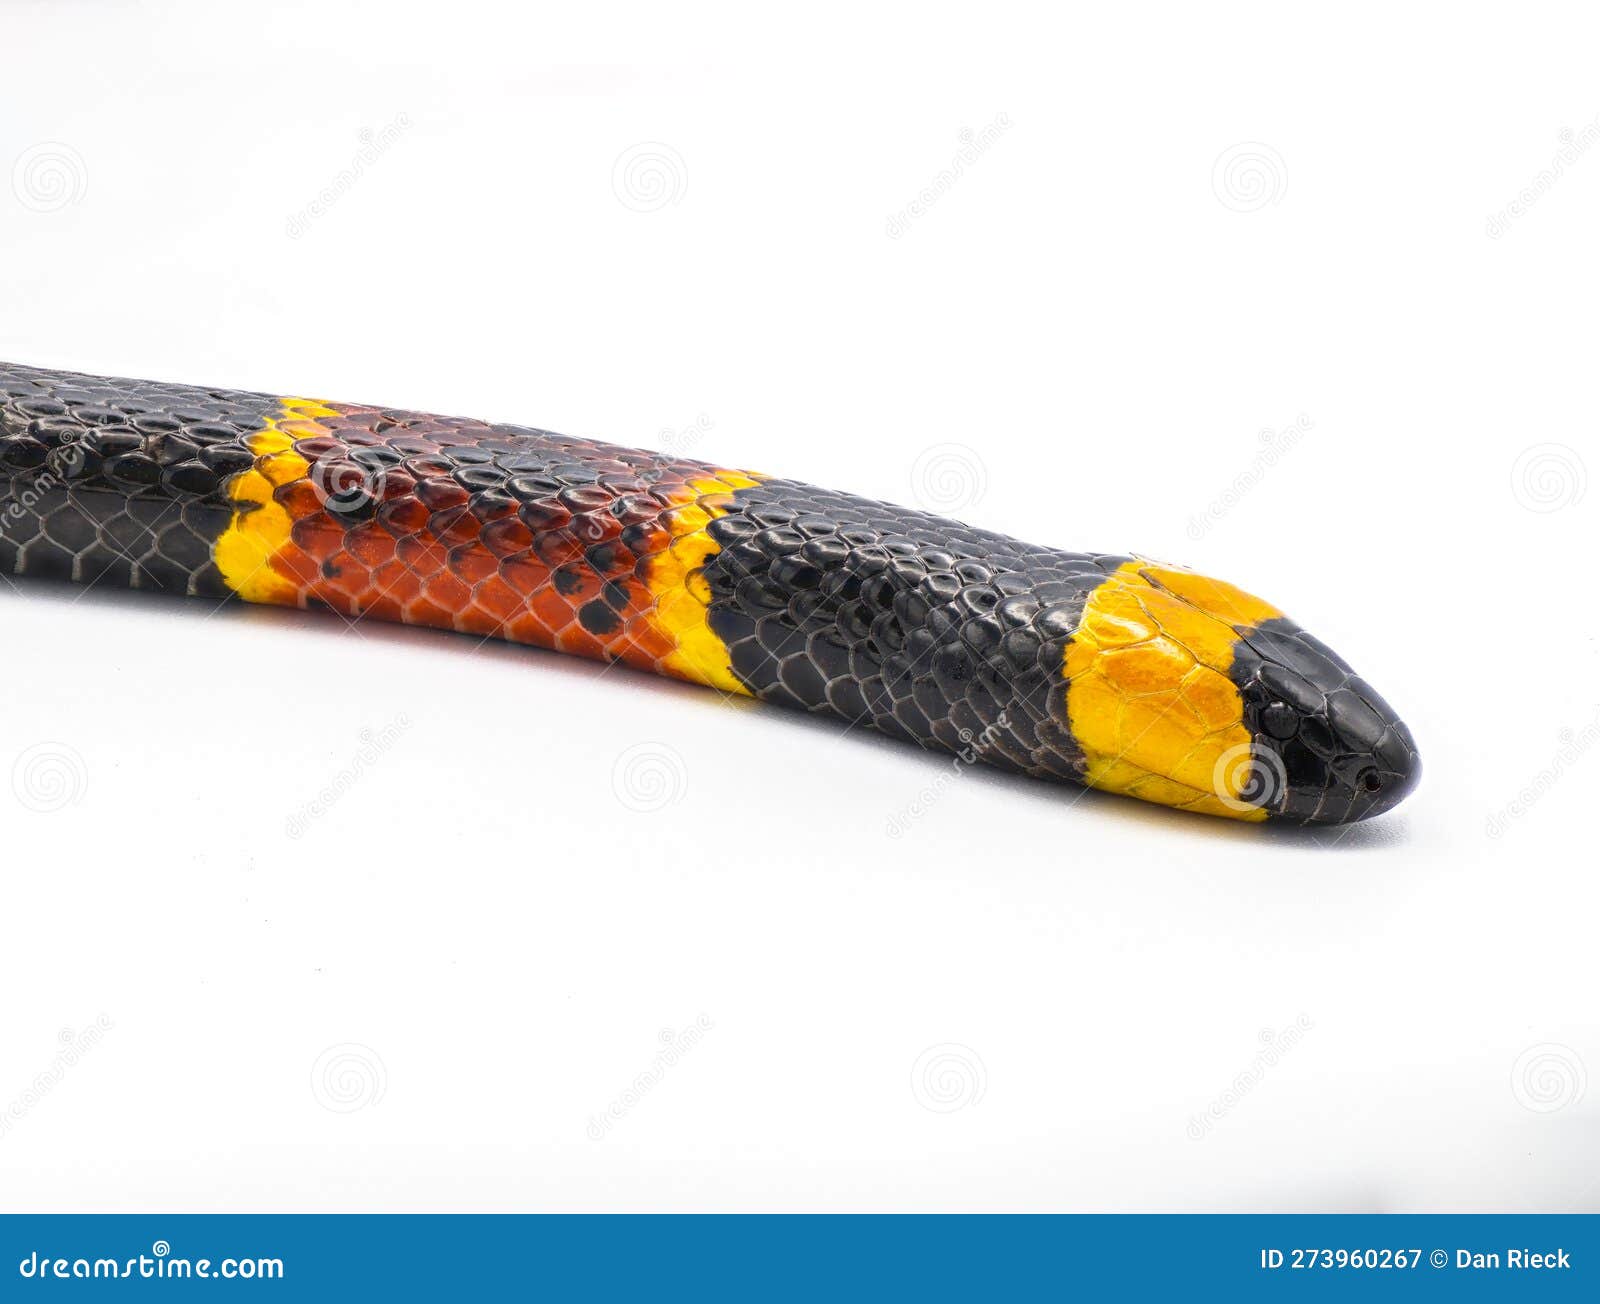 venomous eastern coral snake - micrurus fulvius - close up macro of head, eyes and pattern. side view  on white